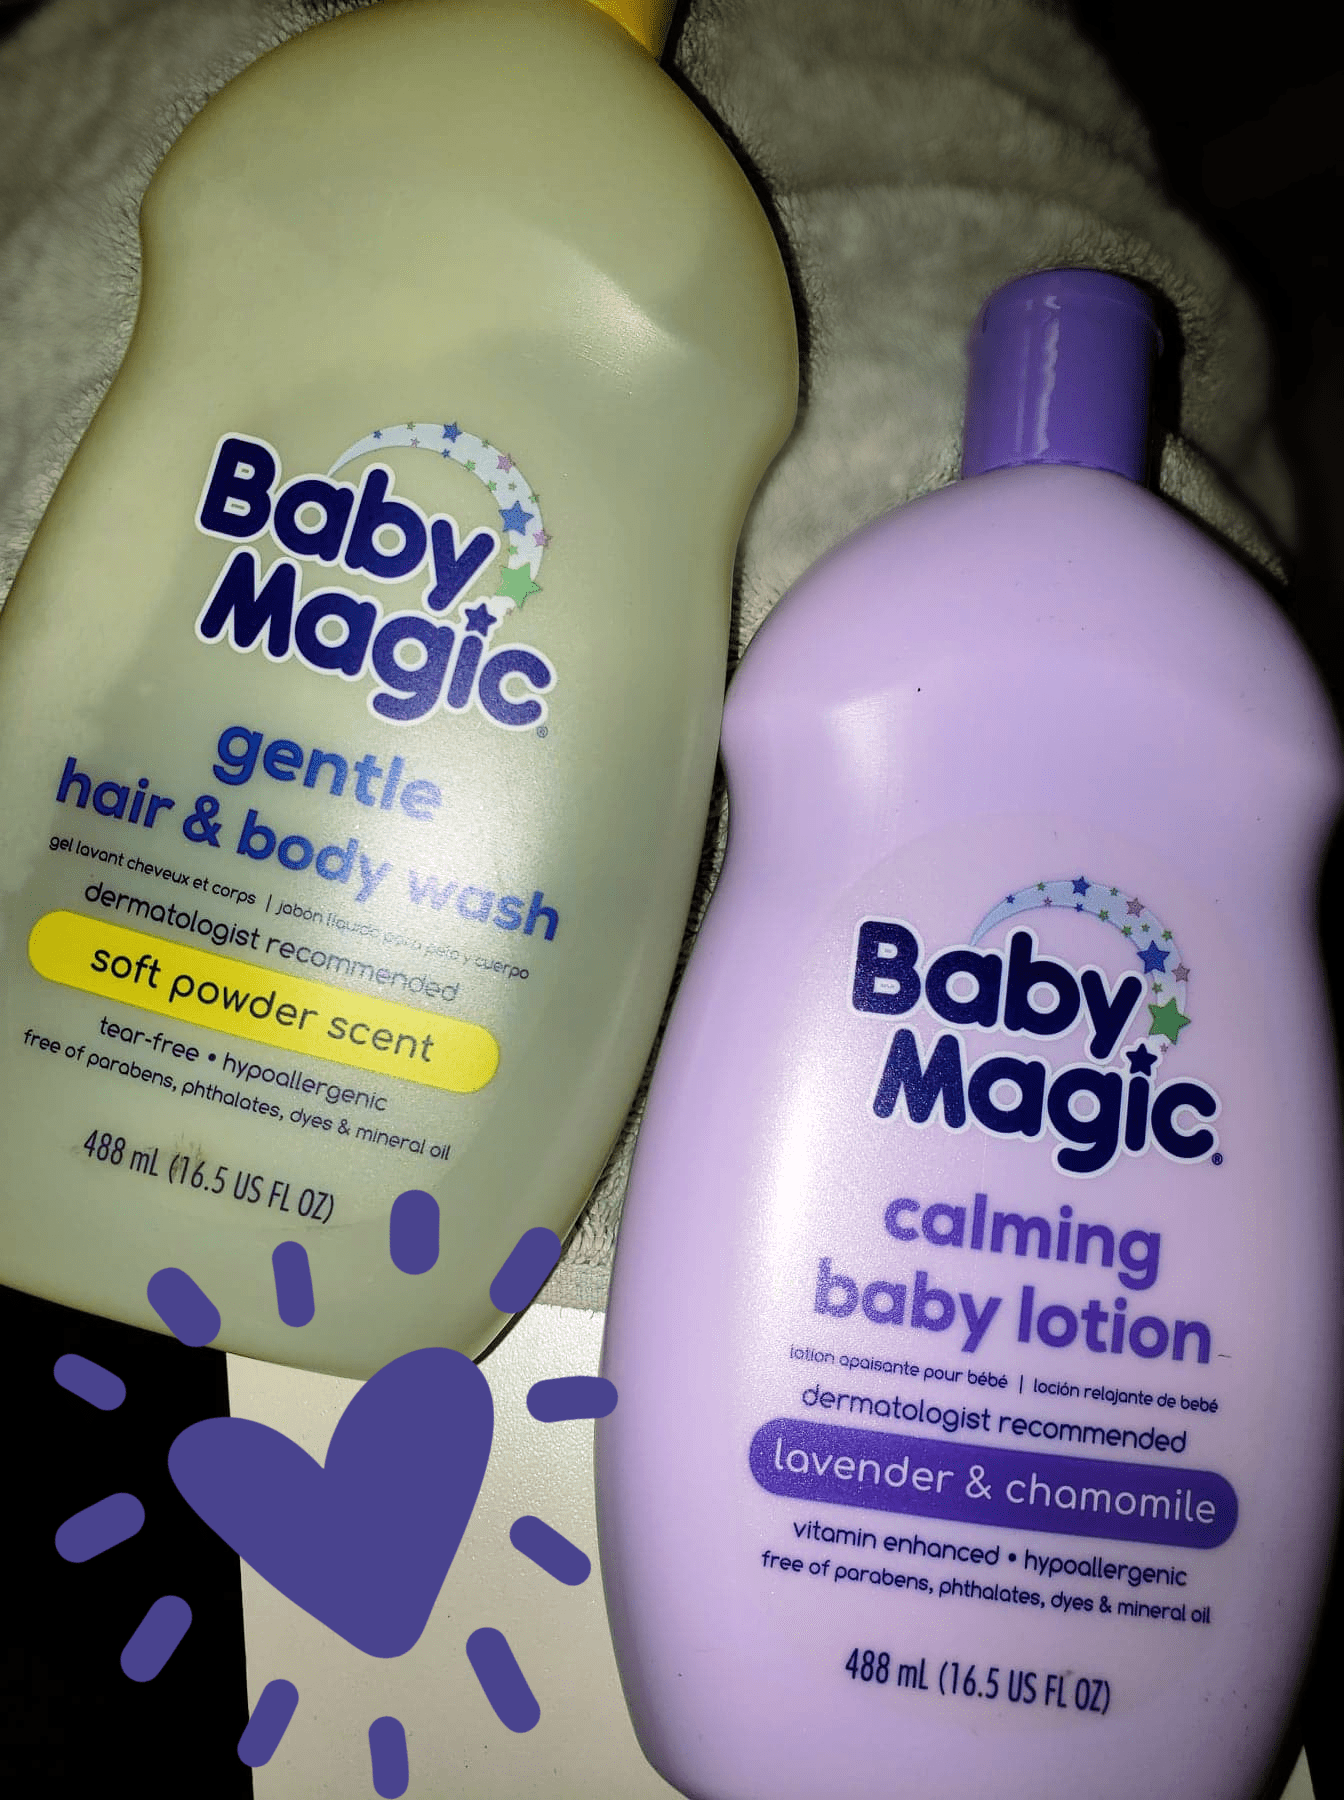 Baby Magic Lotion And Body Wash Are The Best!